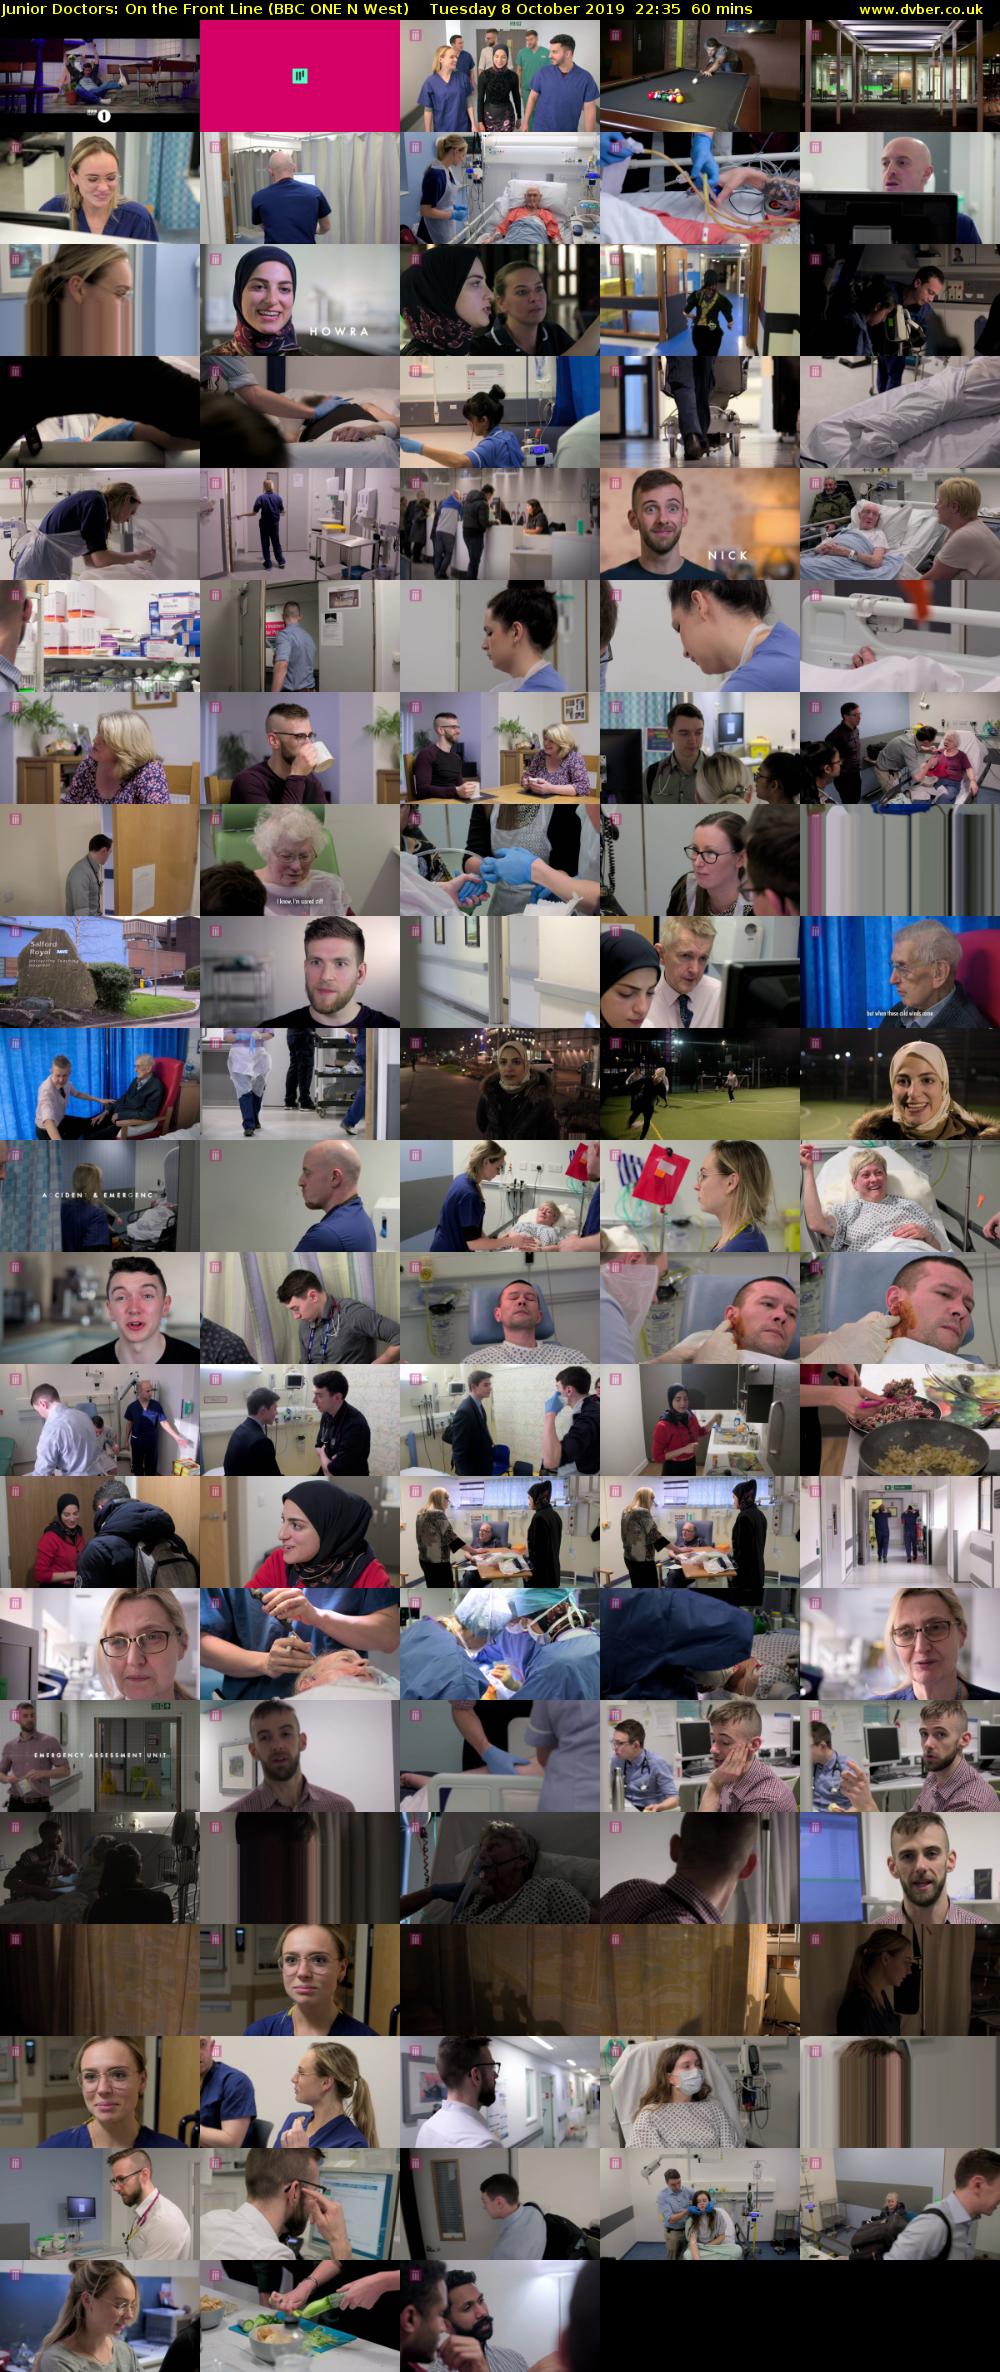 Junior Doctors: On the Front Line (BBC ONE N West) Tuesday 8 October 2019 22:35 - 23:35